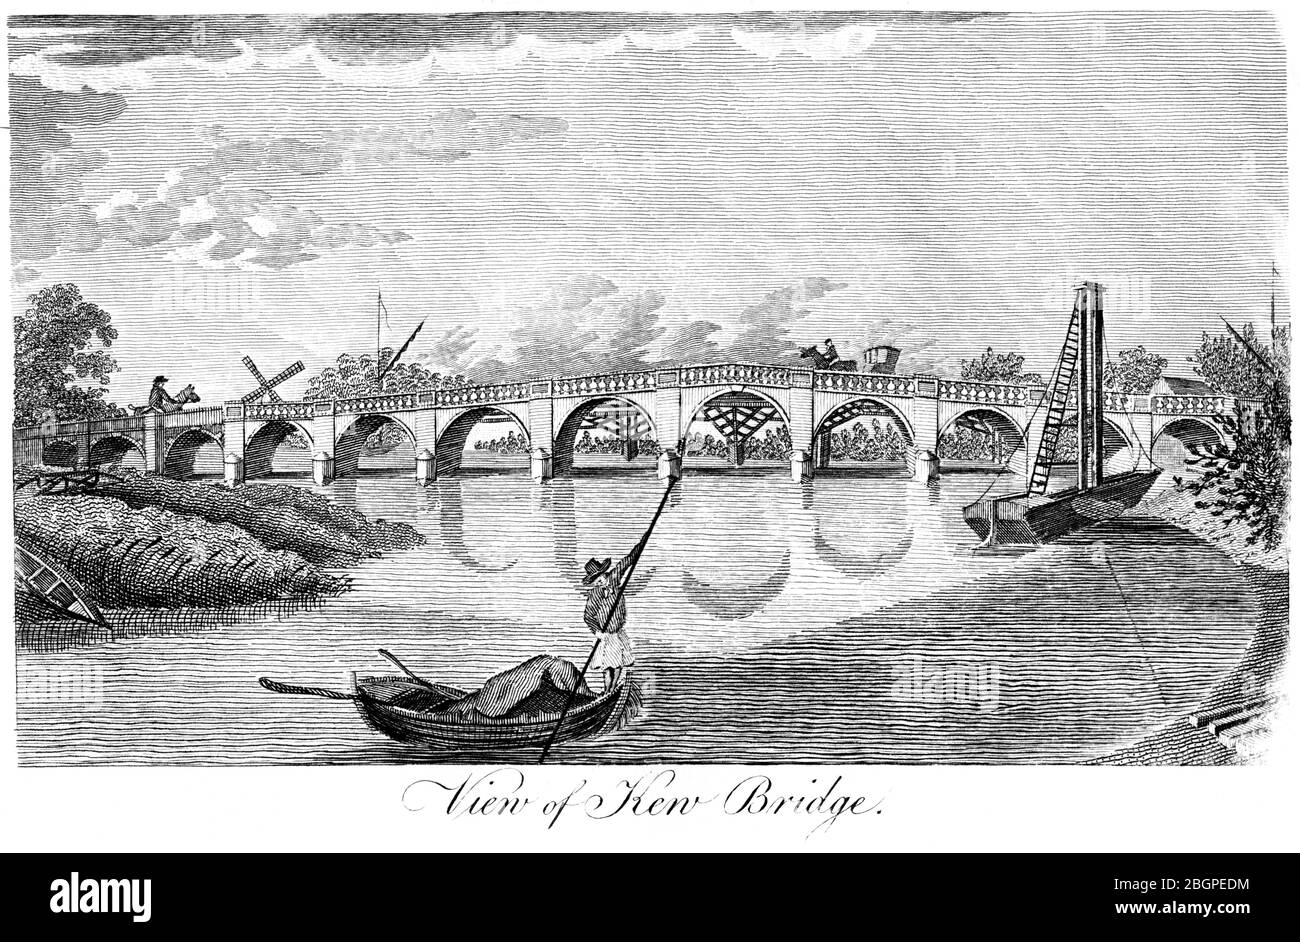 An engraving of Kew Bridge scanned at high resolution from a book printed in 1827. This image is believed to be free of all copyright restrictions. Stock Photo